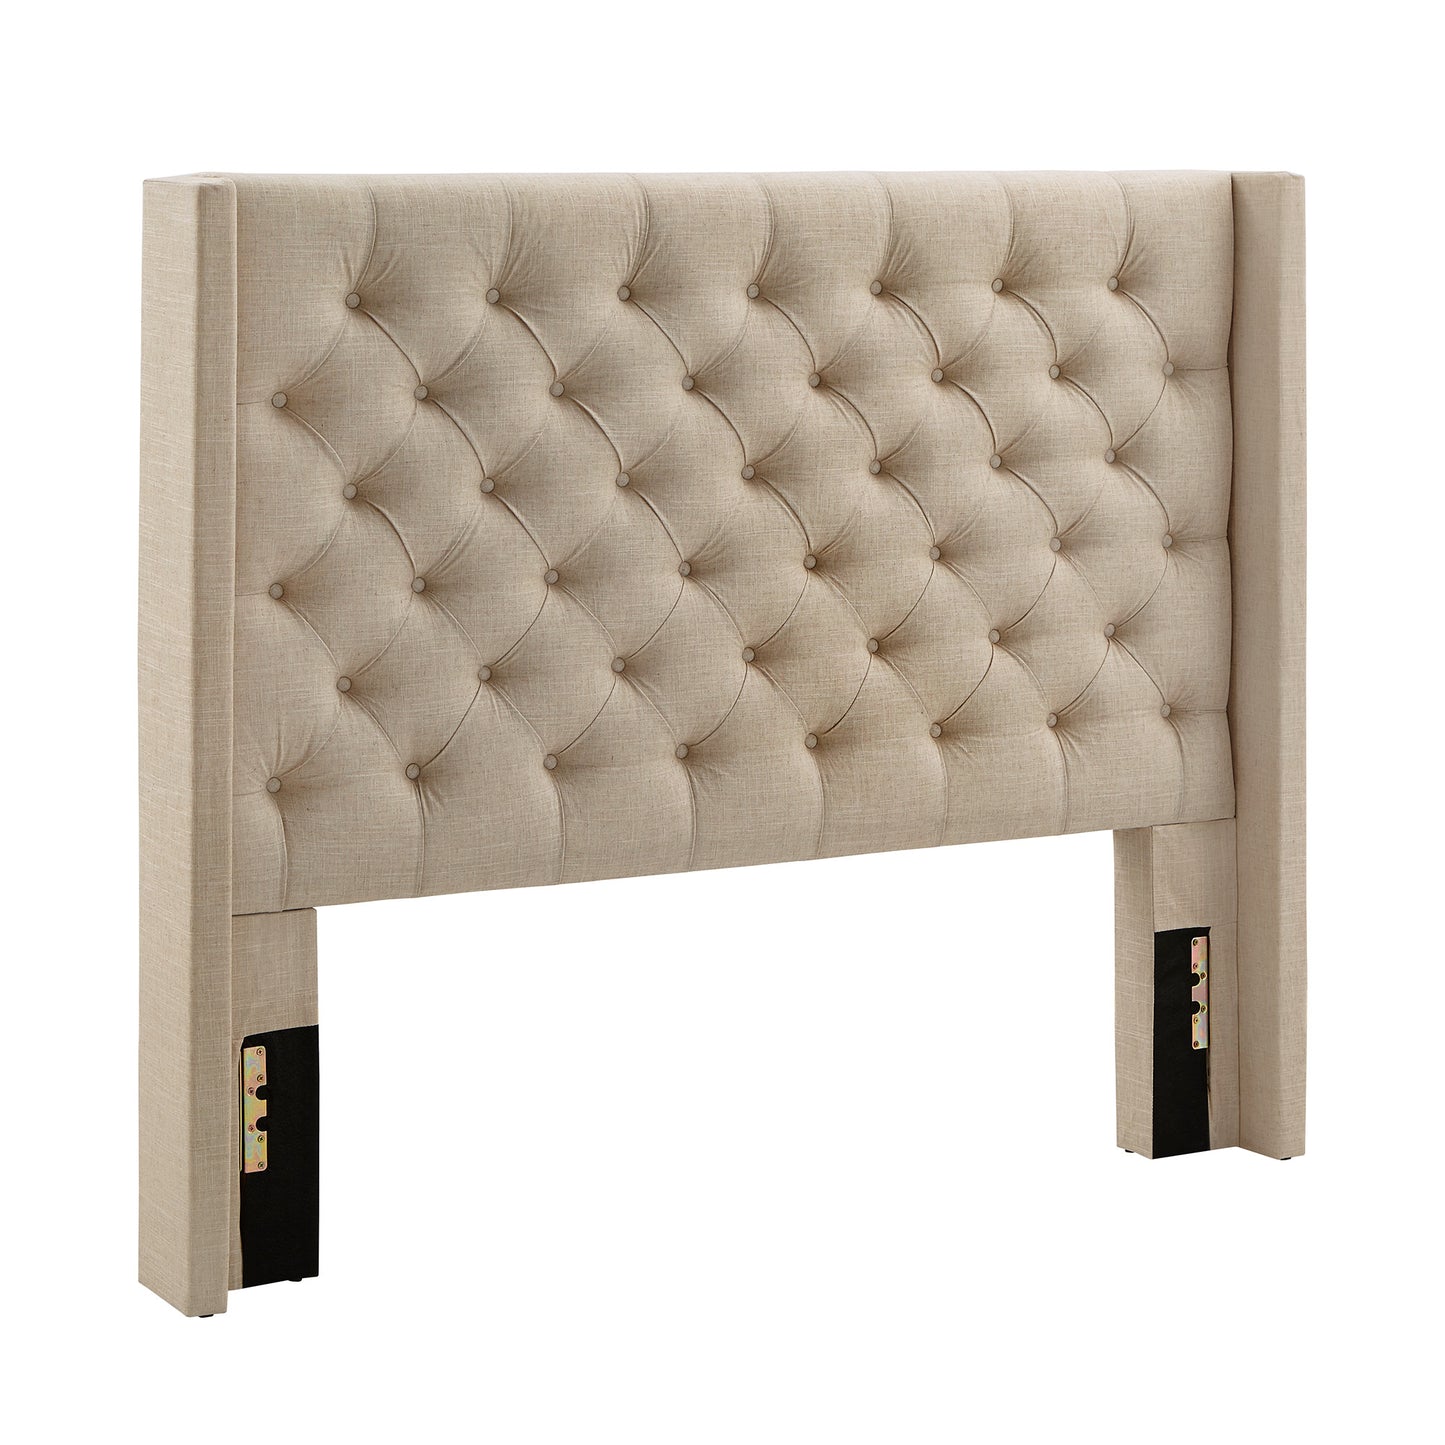 Wingback Button Tufted Linen Fabric Headboard - Beige, 52-inch Height, Full Size